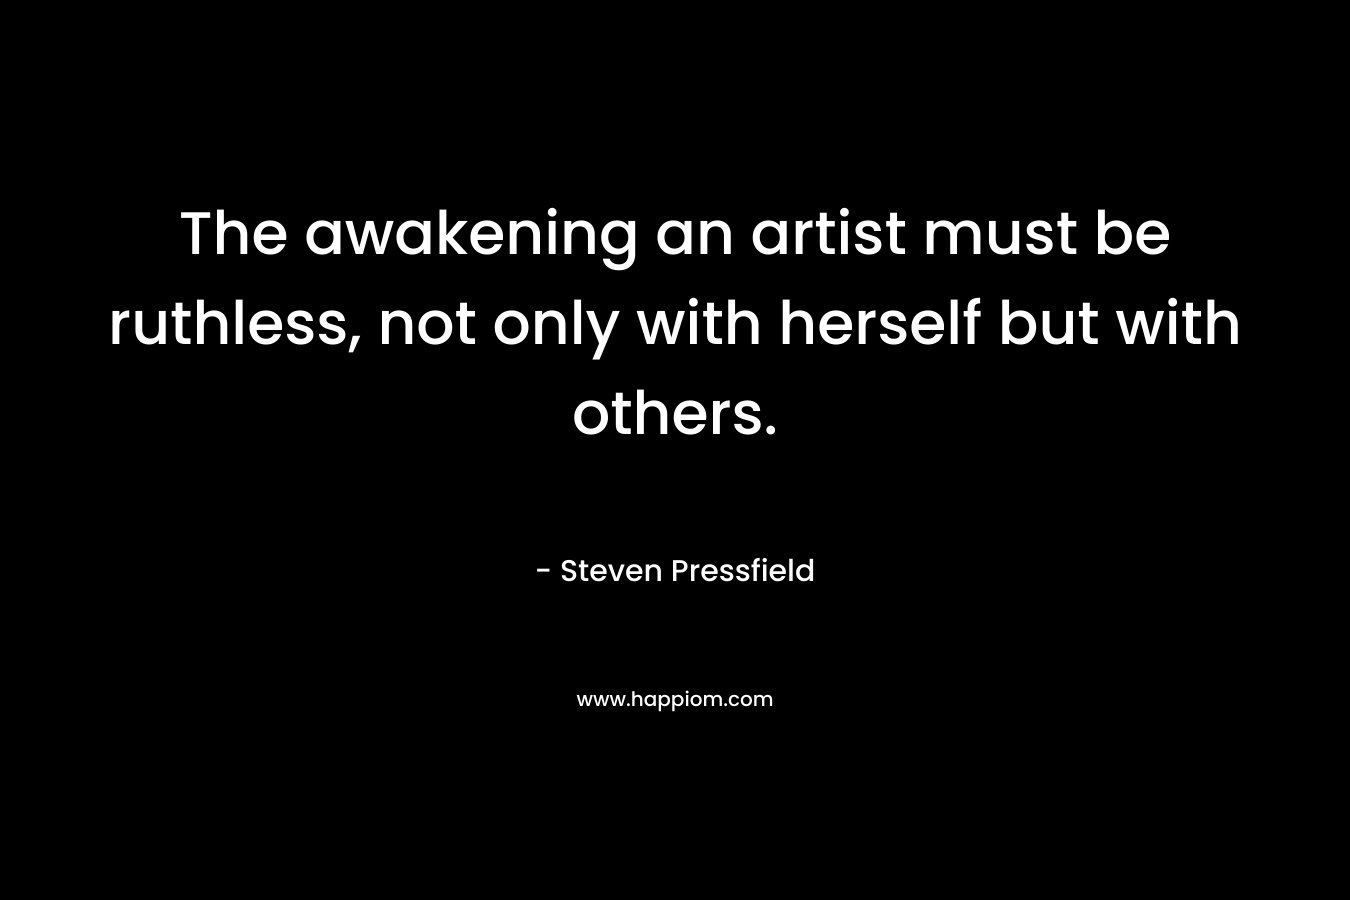 The awakening an artist must be ruthless, not only with herself but with others.